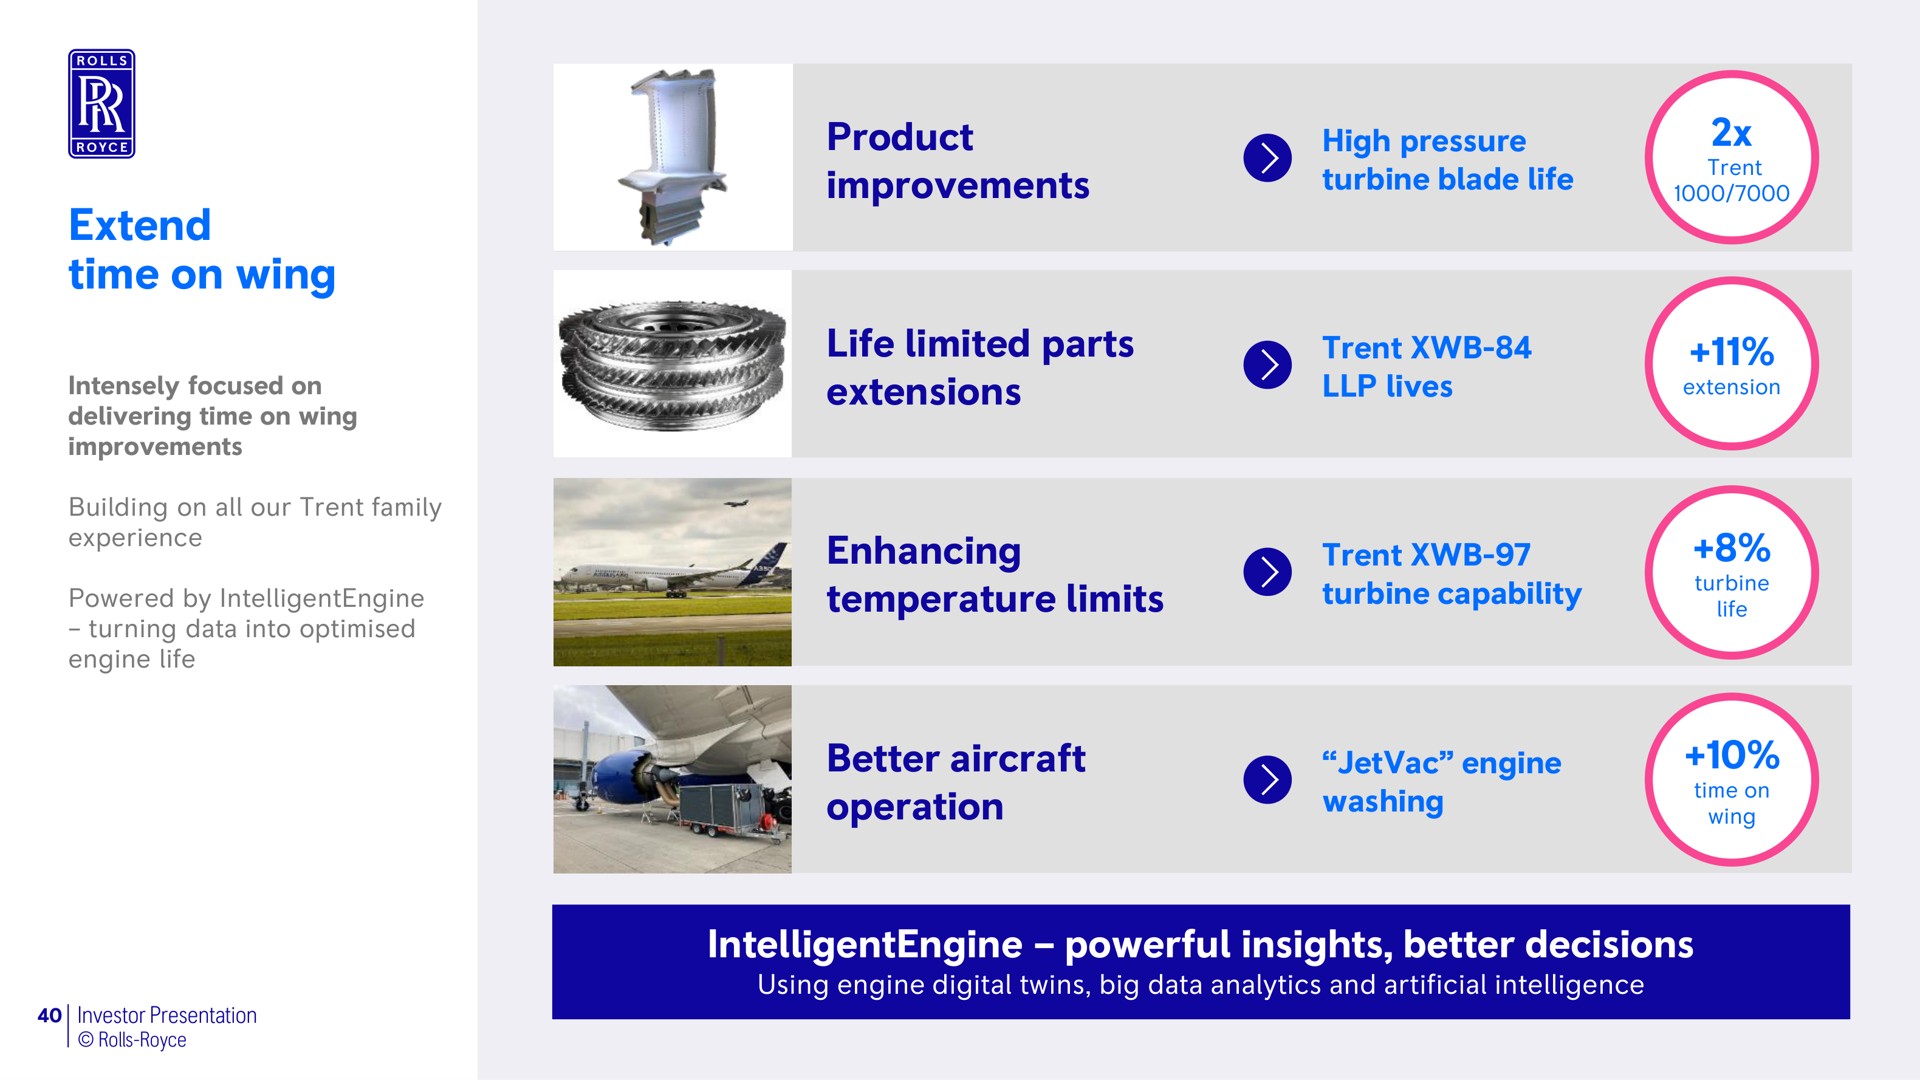 extend time on wing product improvements life limited parts extensions enhancing temperature limits better aircraft operation powerful insights better decisions high pressure so washing | Rolls-Royce Holdings